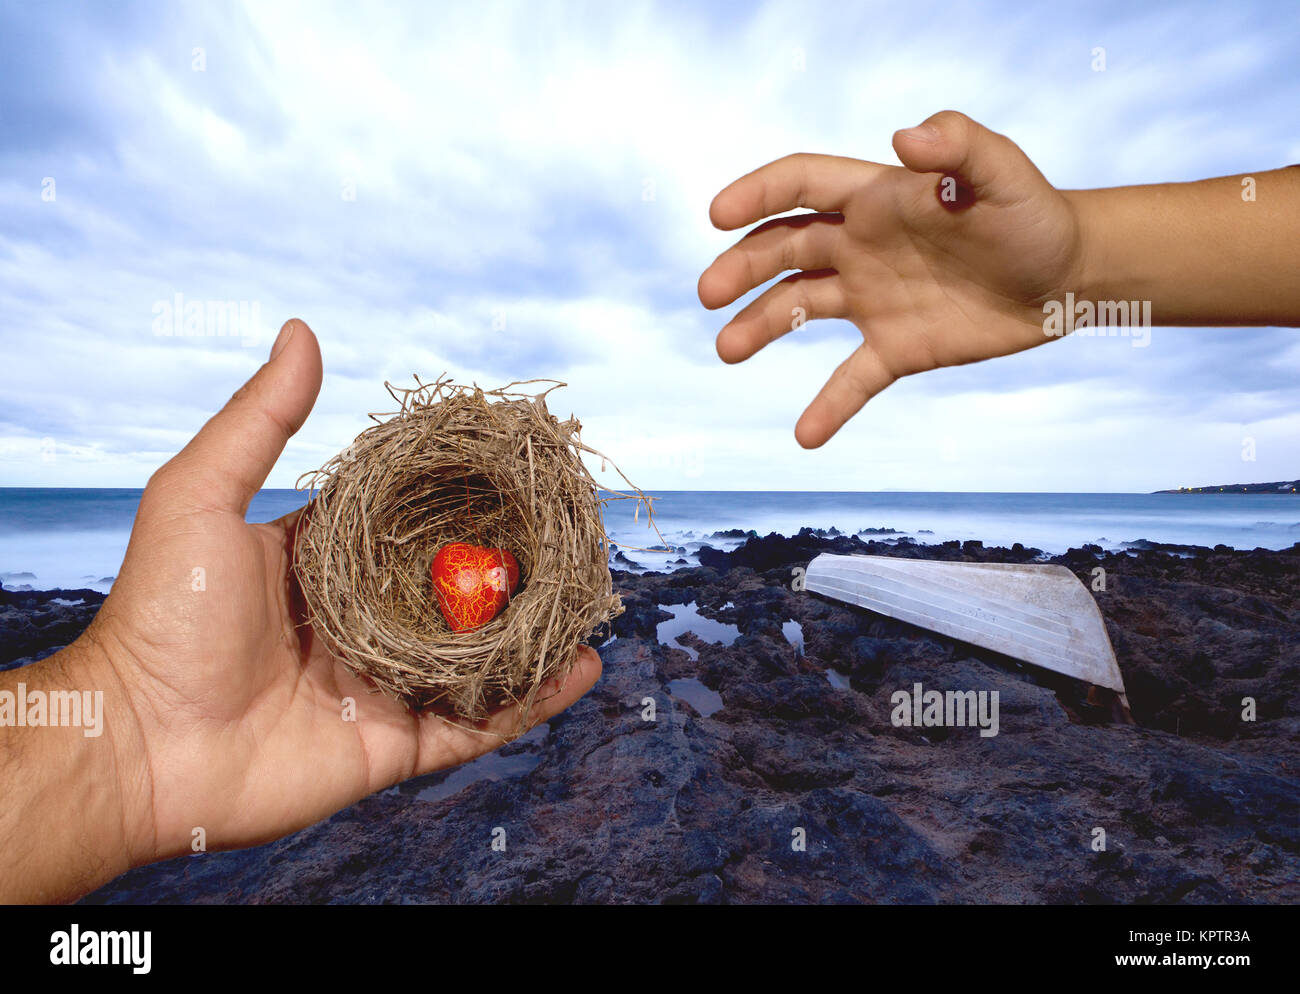 Human hands keep a natural nest with  a red heart inside and a child tries to reach this nest. Family bonds, protection, security, hope, solidarity. Stock Photo